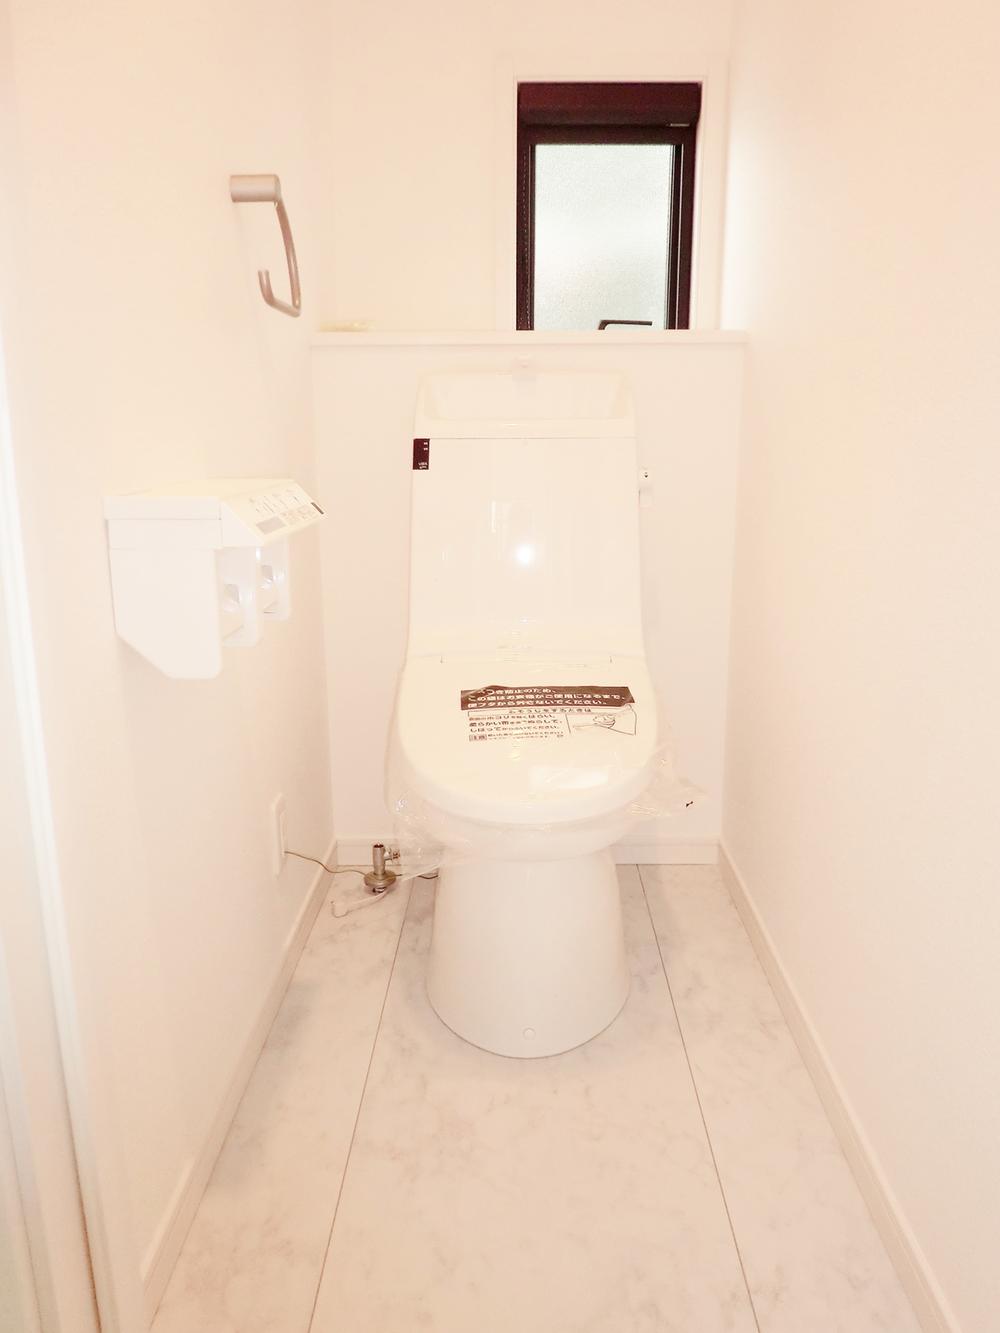 Other Equipment. About 69 percent of the water-saving is achieved compared to the toilet of the conventional INAX! Year how about 13,800 yen in deals! Since the dirt also easy to fall in hyper Kira Mick, Care also Rakuchin